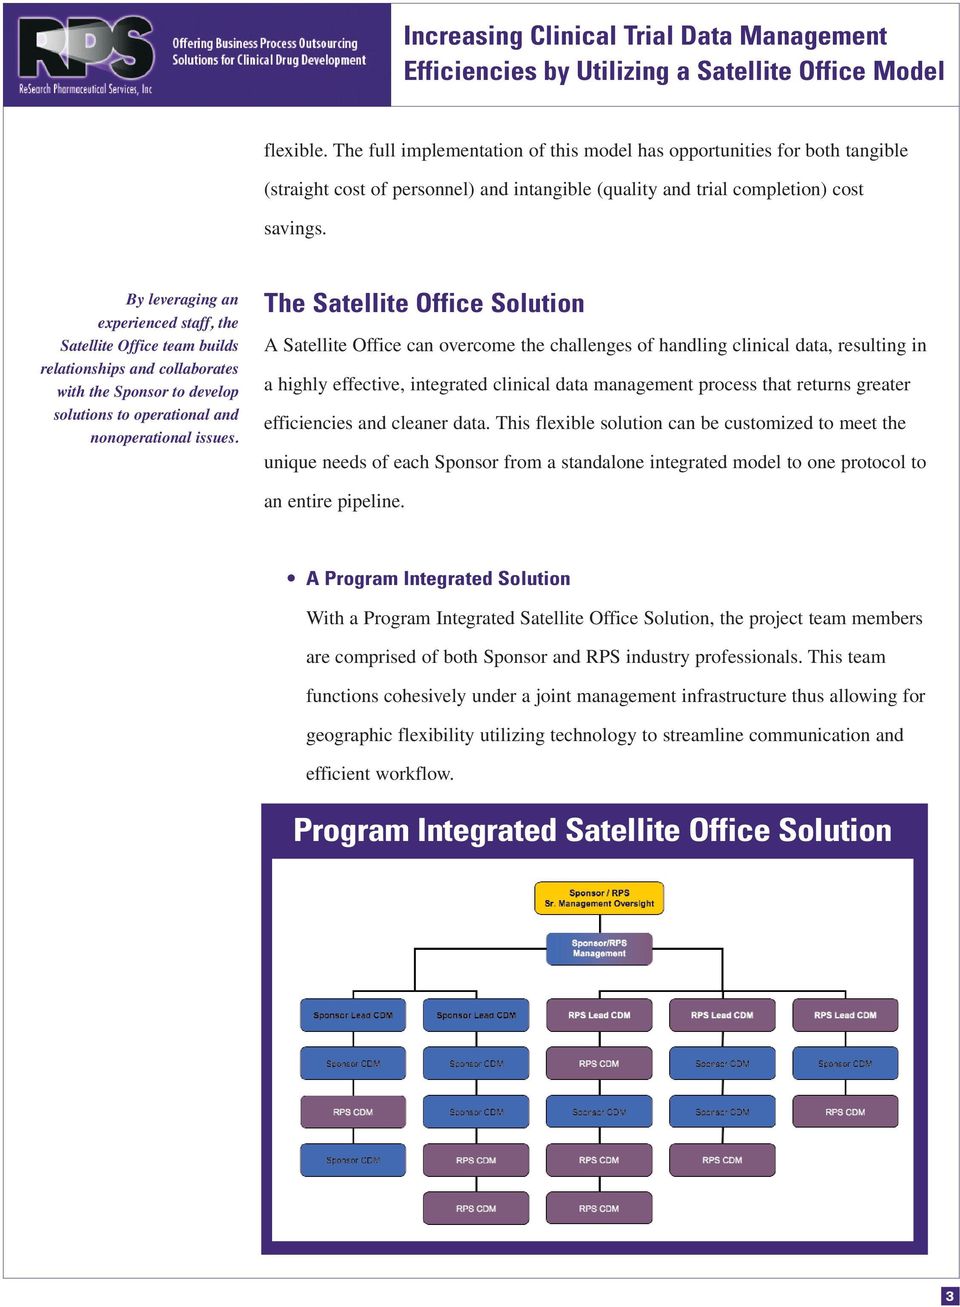 The Satellite Office Solution A Satellite Office can overcome the challenges of handling clinical data, resulting in a highly effective, integrated clinical data management process that returns